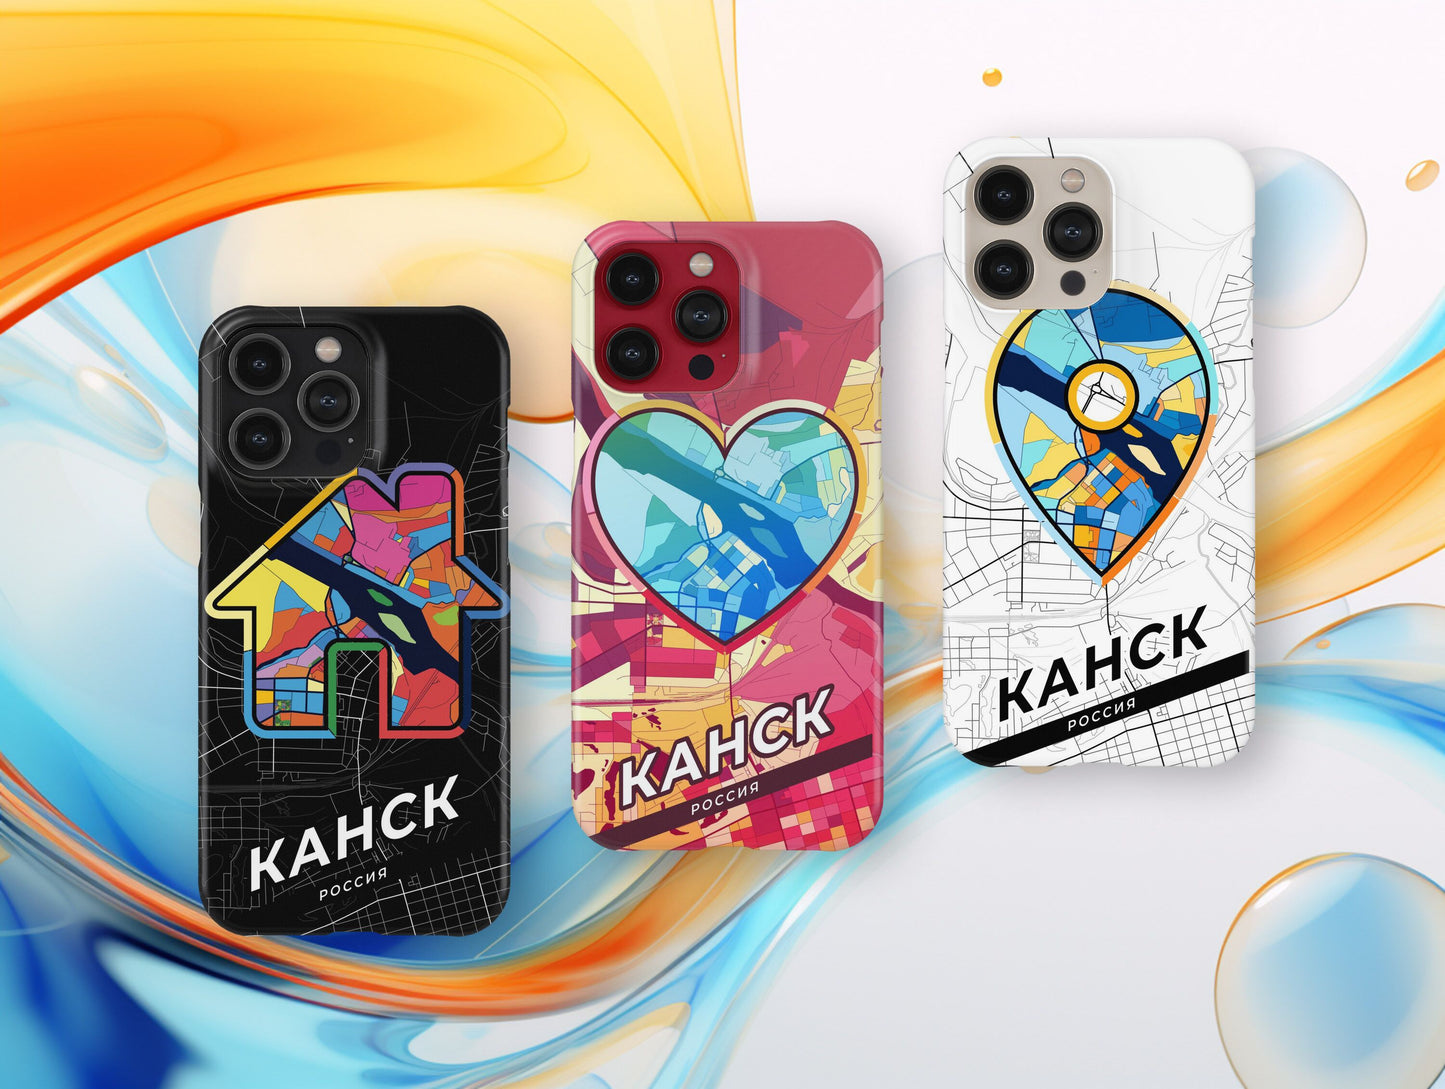 Kansk Russia slim phone case with colorful icon. Birthday, wedding or housewarming gift. Couple match cases.